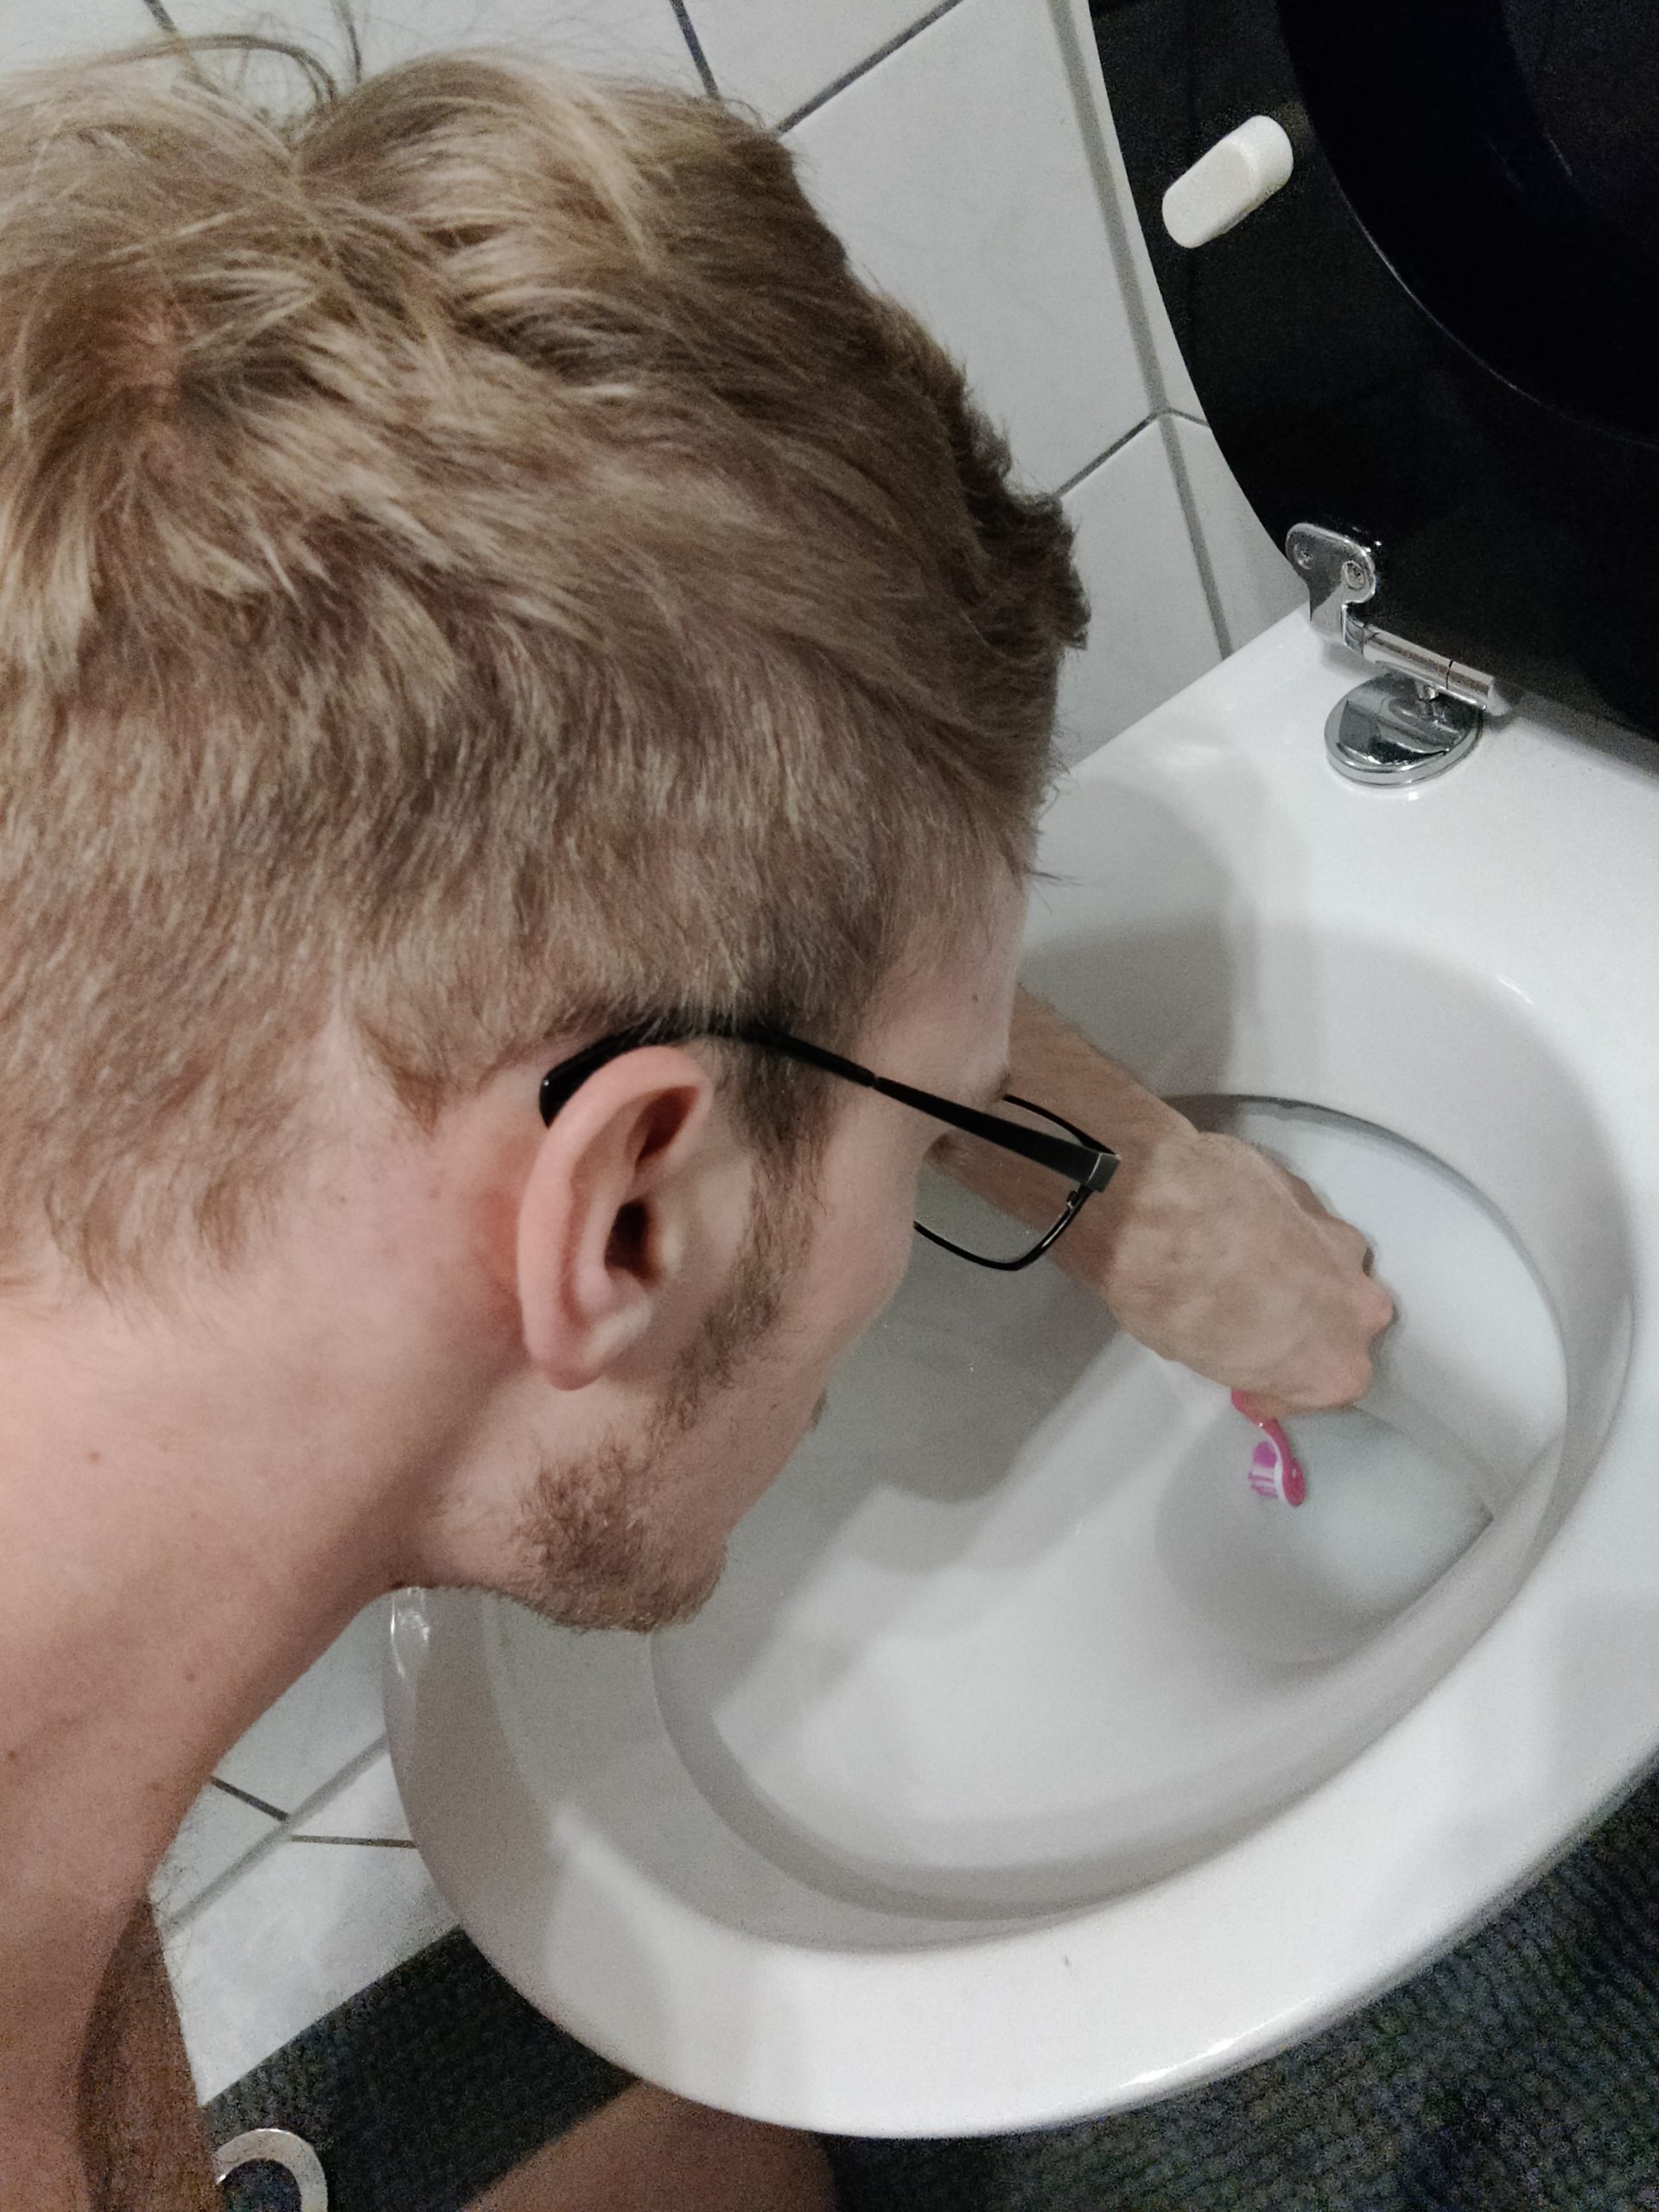 Mouthful of dirty toilet